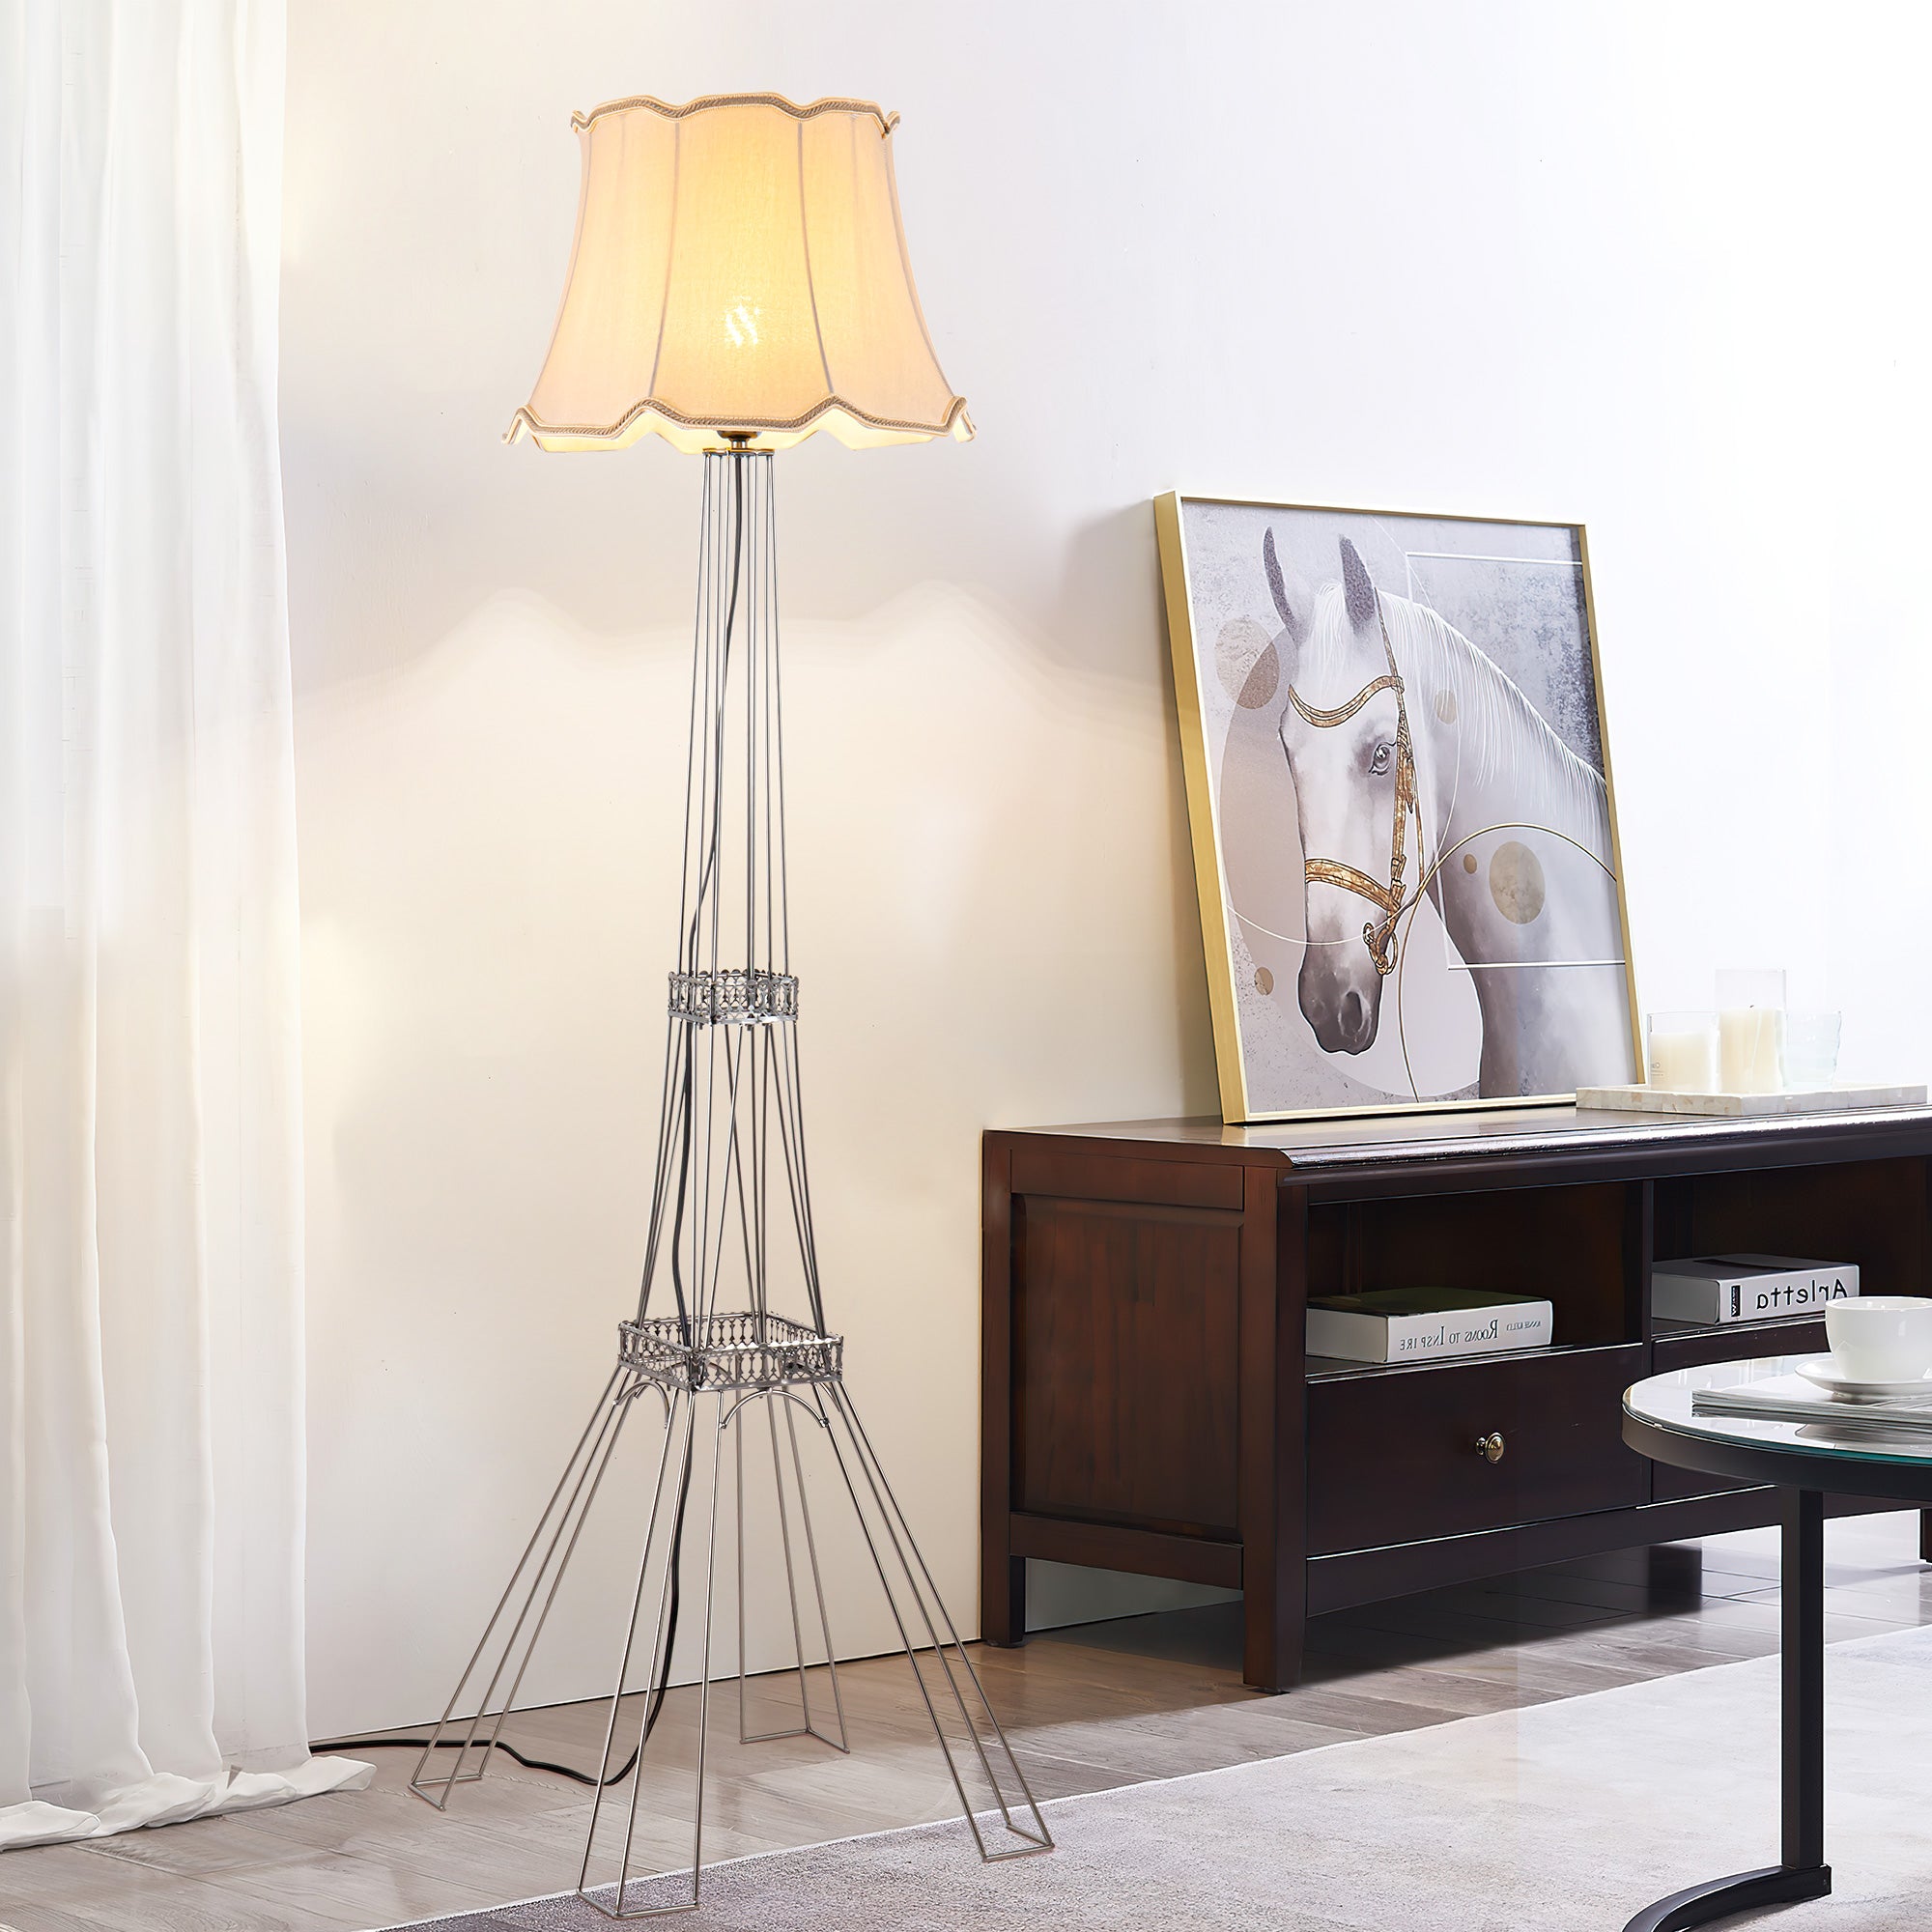 56" Brass LED Light Changing Floor Lamp With Beige Bell Shade